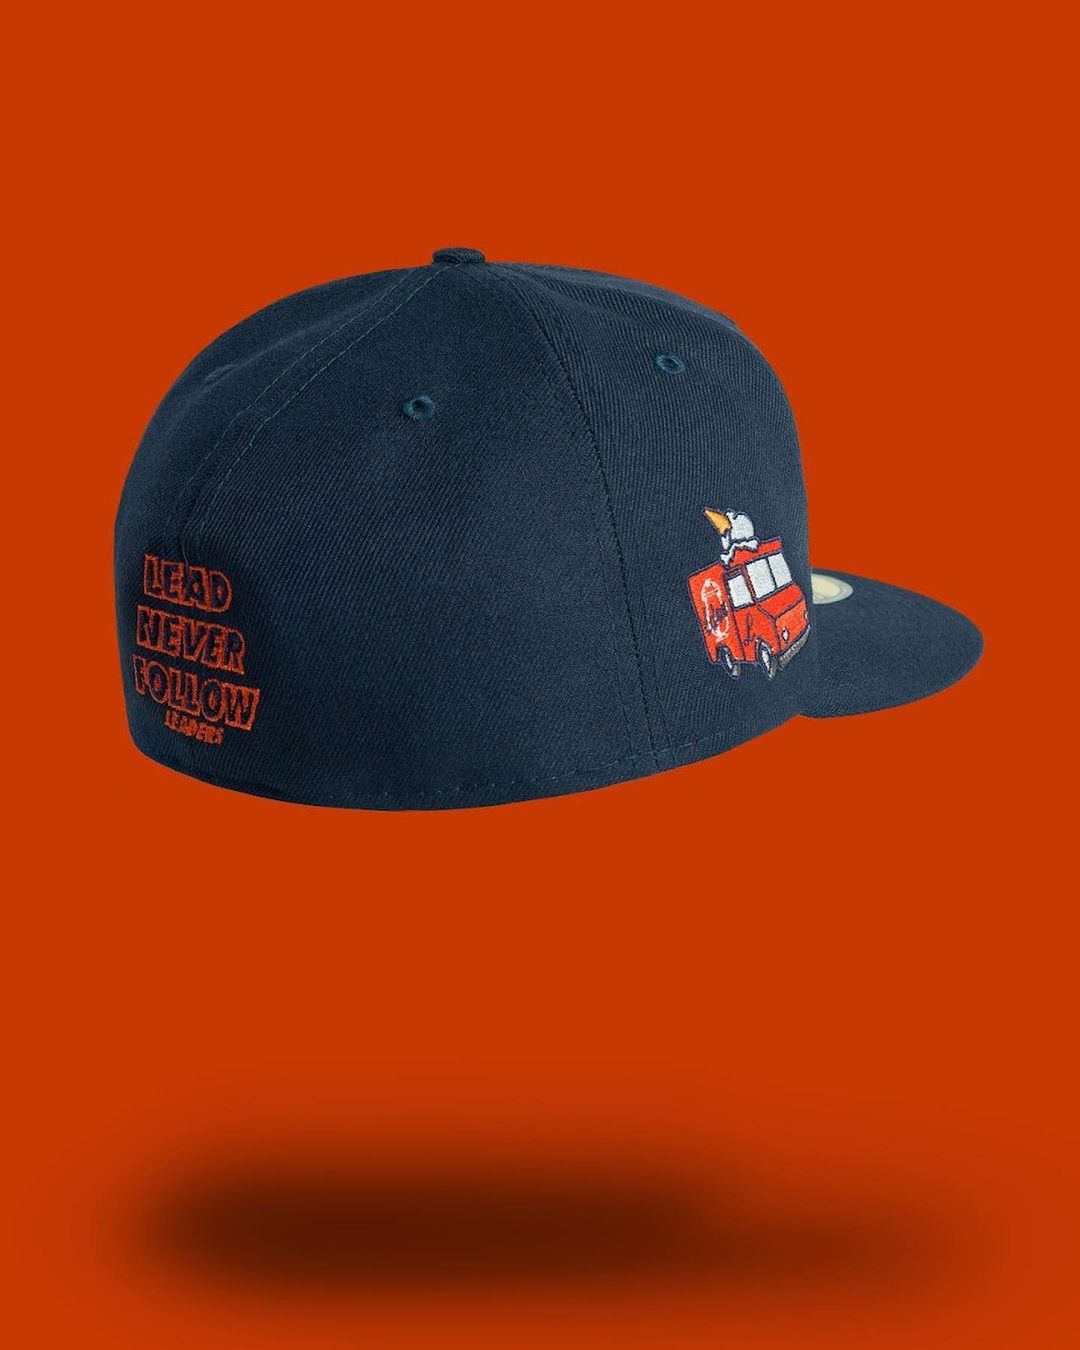 Leaders 1354 x Chicago Bears 1946 Navy/Orange Fitted Hat